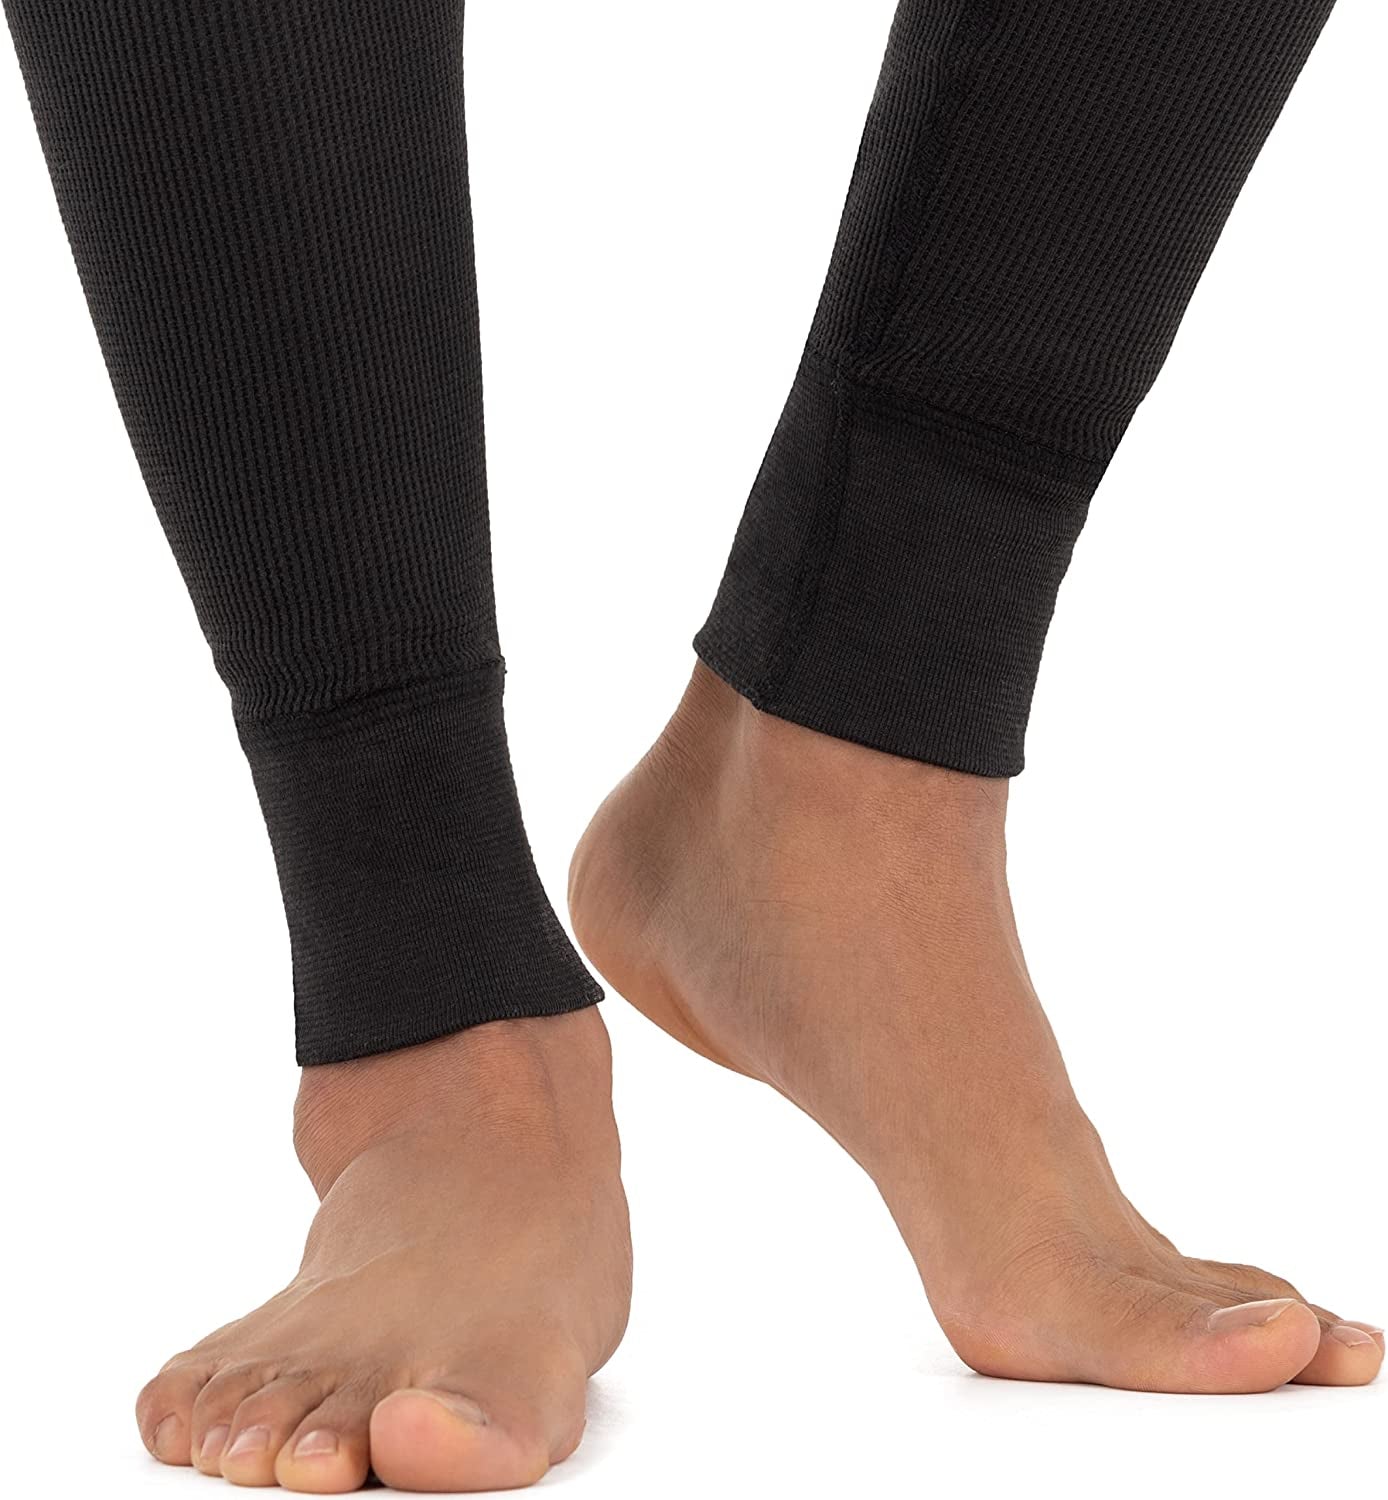 Men'S Recycled Premium Waffle Thermal Underwear Long Johns Bottom (1, 2, 3, and 4 Packs)